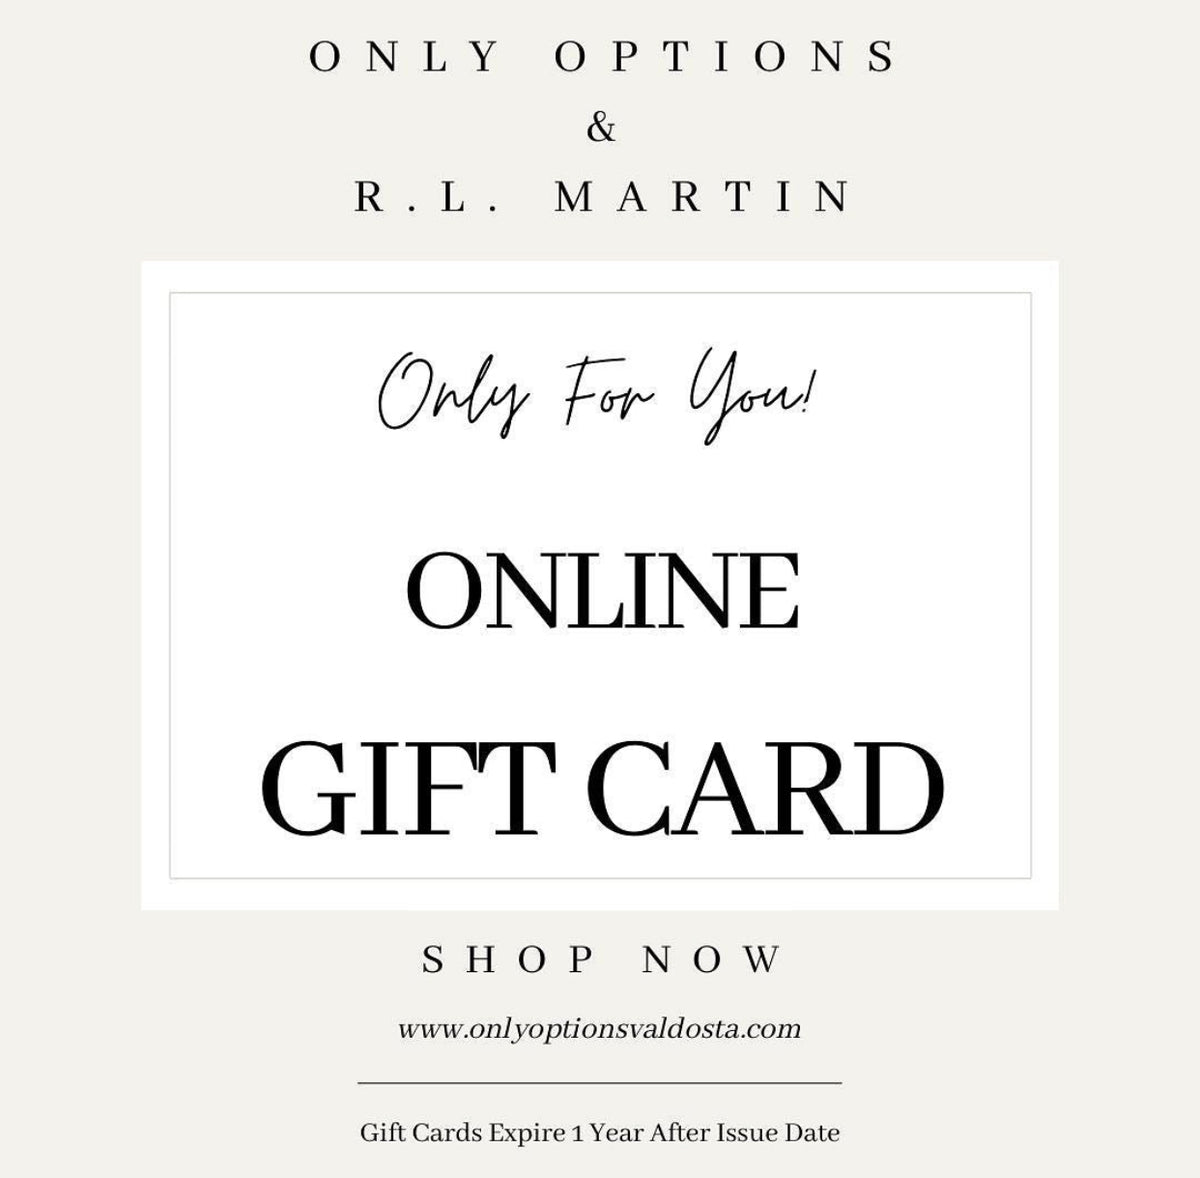 eGift Card - For online purchase only